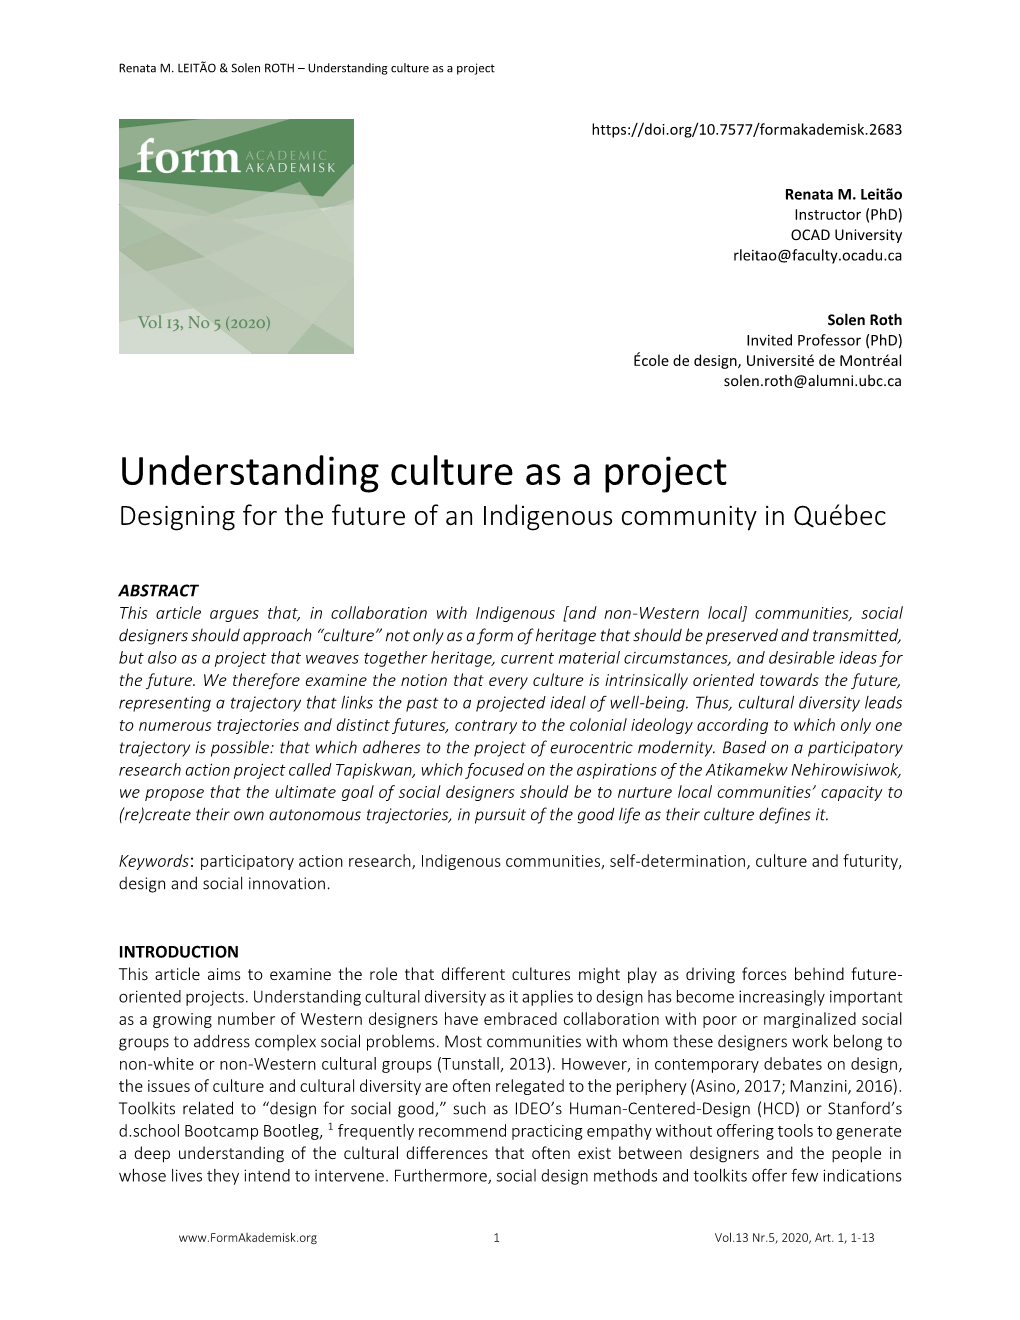 Understanding Culture As a Project